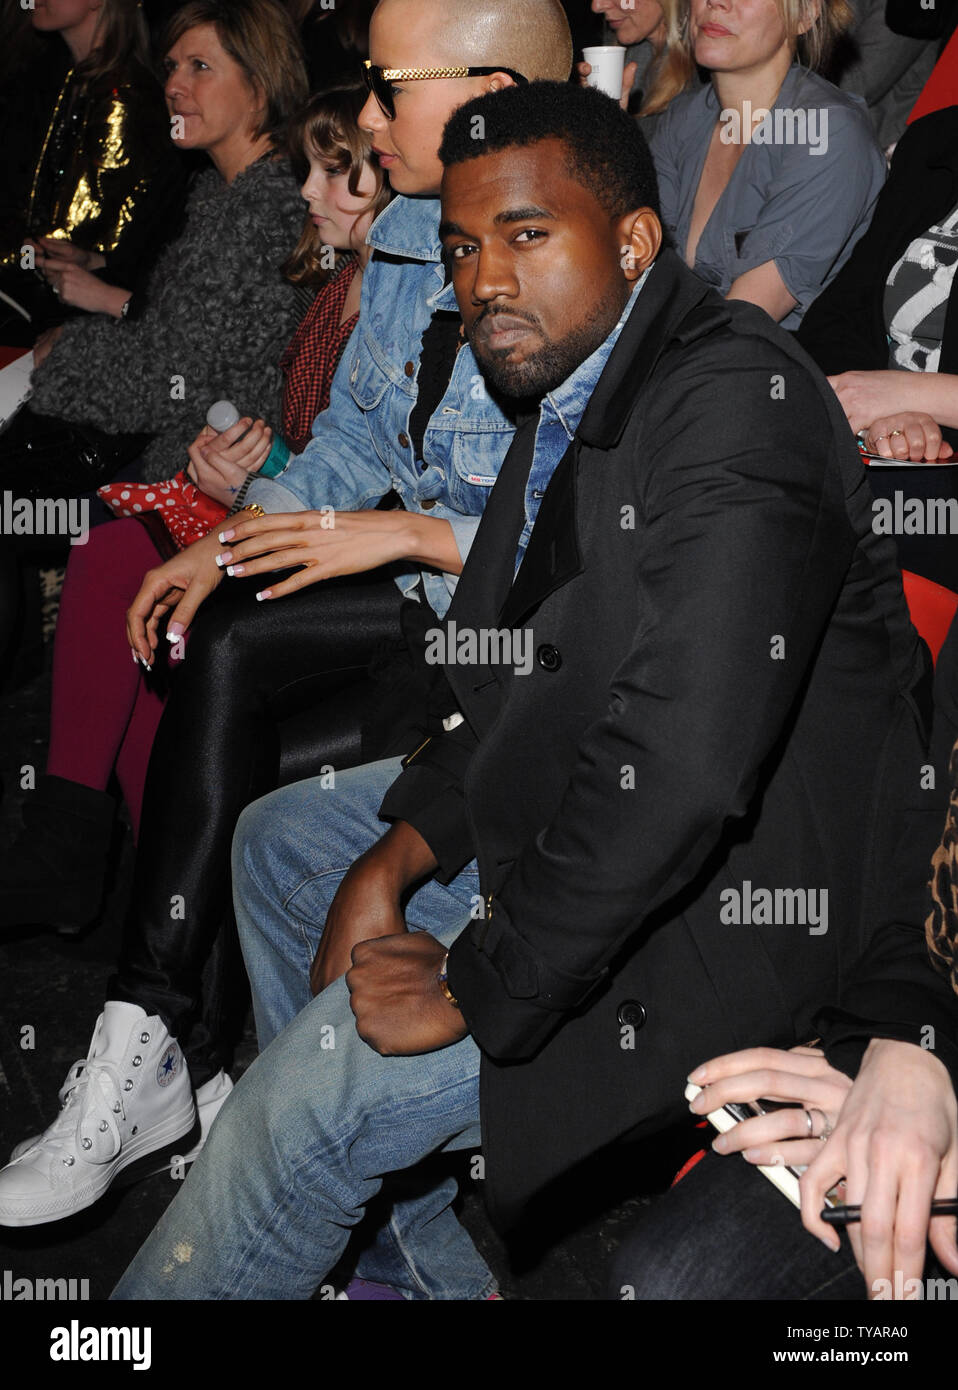 American singer Kanye West attends Vivienne Westwood's Autumn/Winter collection catwalk show at London Fashion Week in London on February 21, 2009.  (UPI Photo/Rune Hellestad) Stock Photo